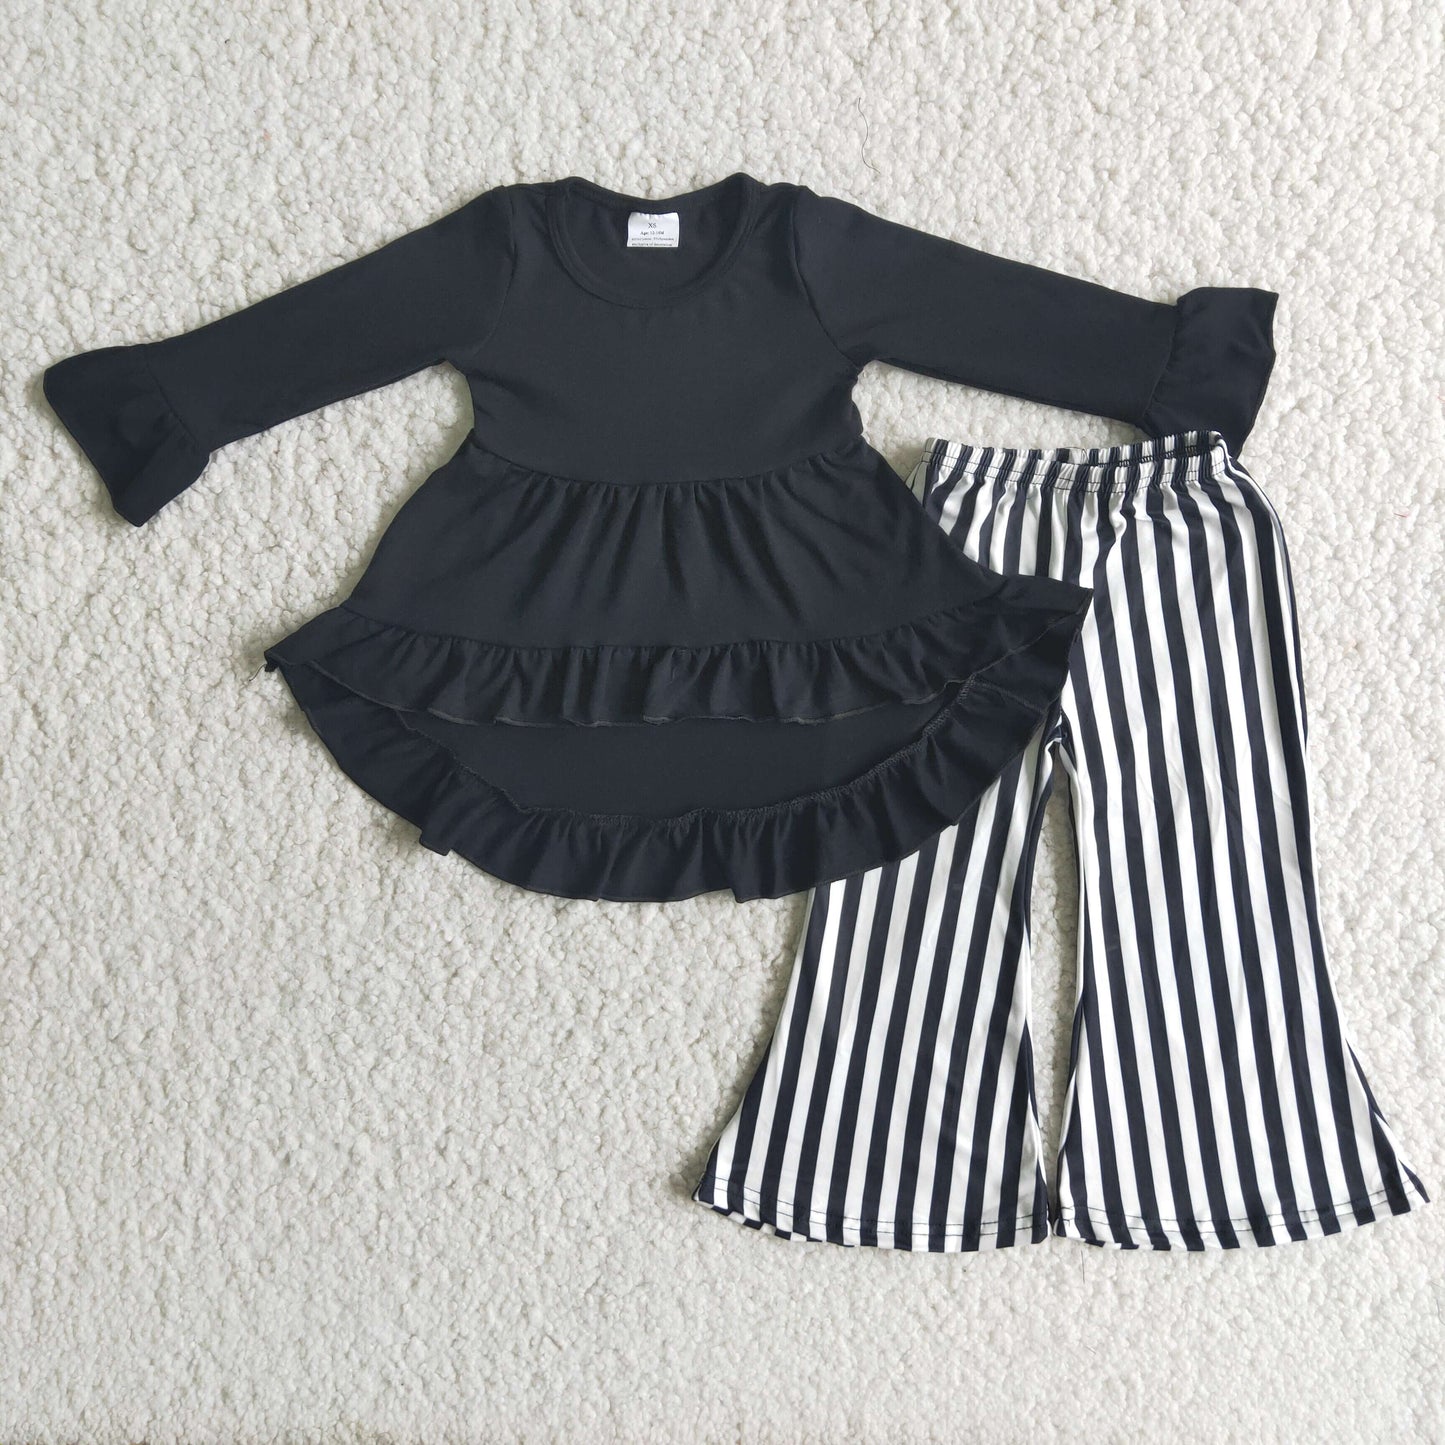 Black high low top match stripe pants girls fall winter outfits